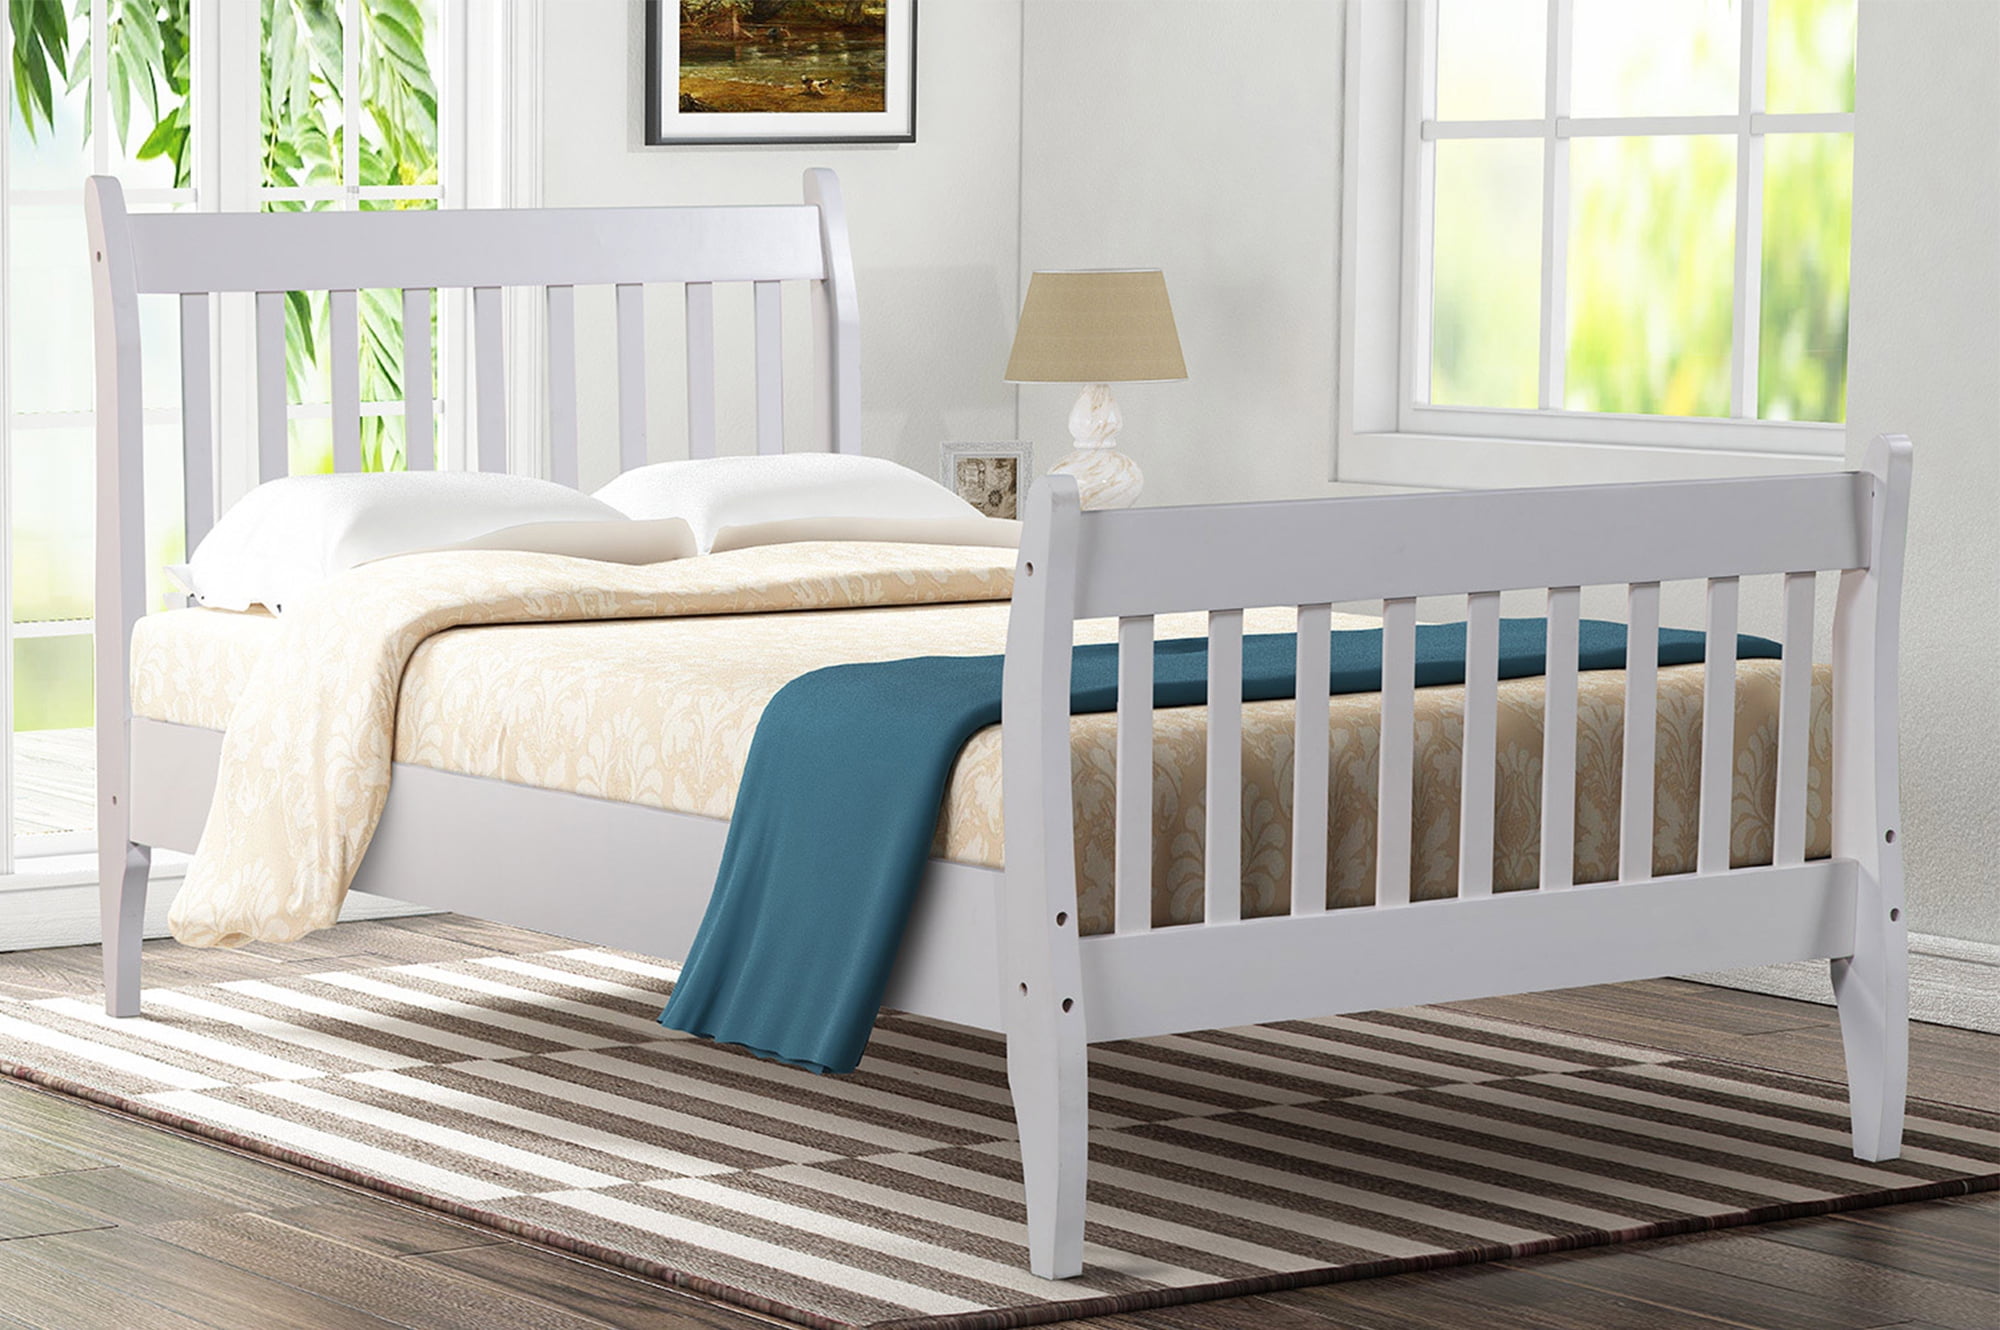 Twin Bed Frame with Headboard and Footboard, White Twin Bed Frame for